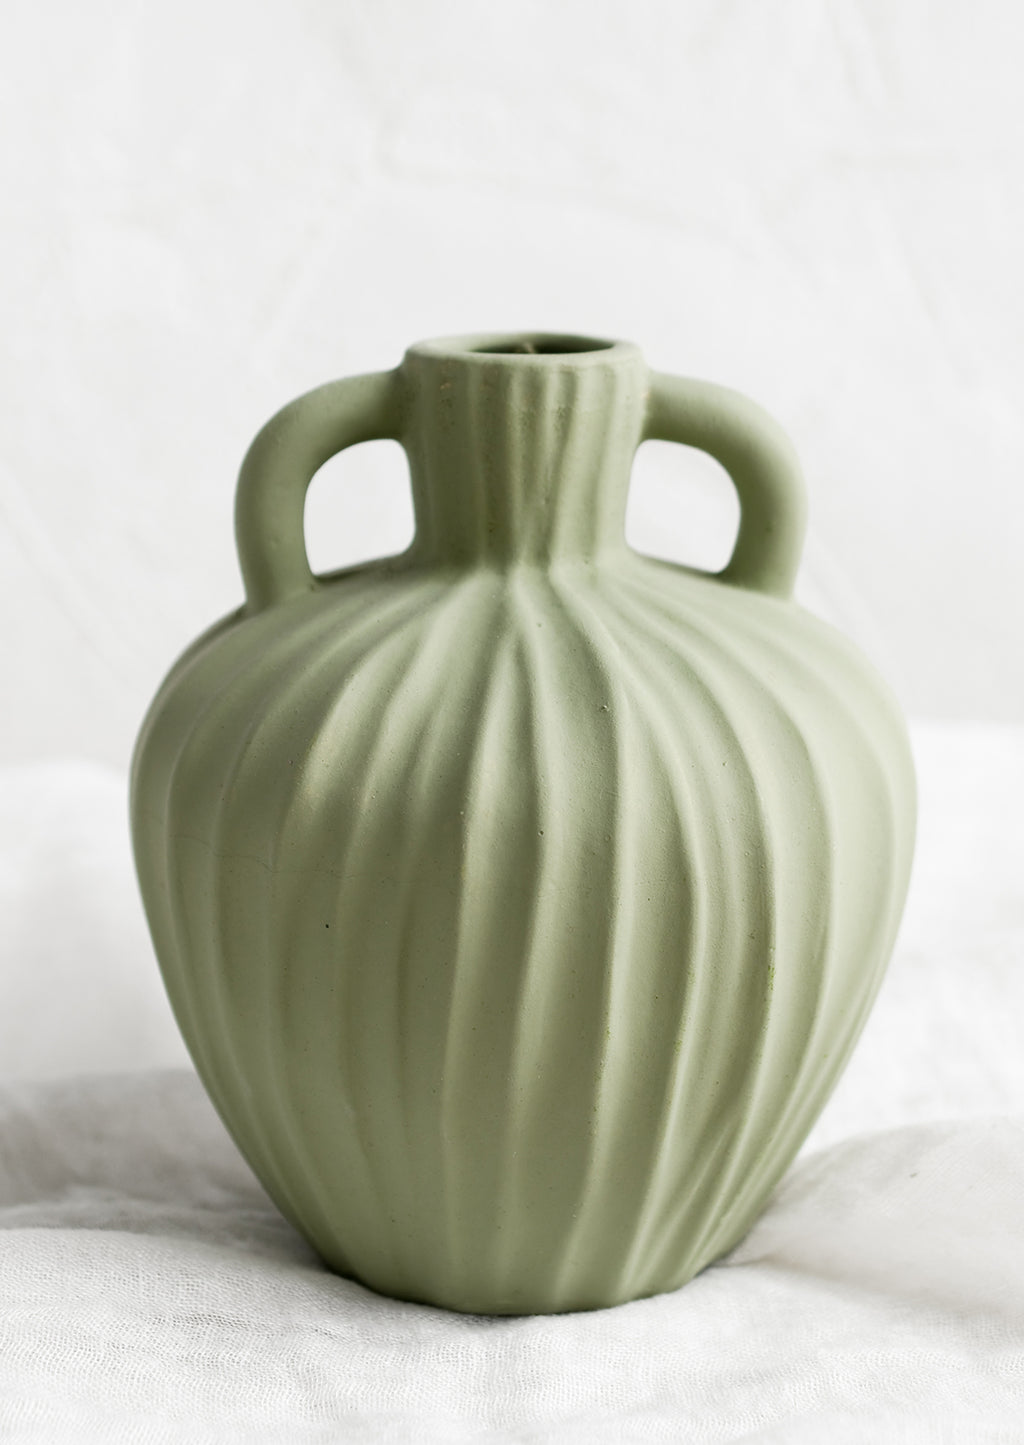 2: A mint green ceramic vase with handles at sides and carved line texture.